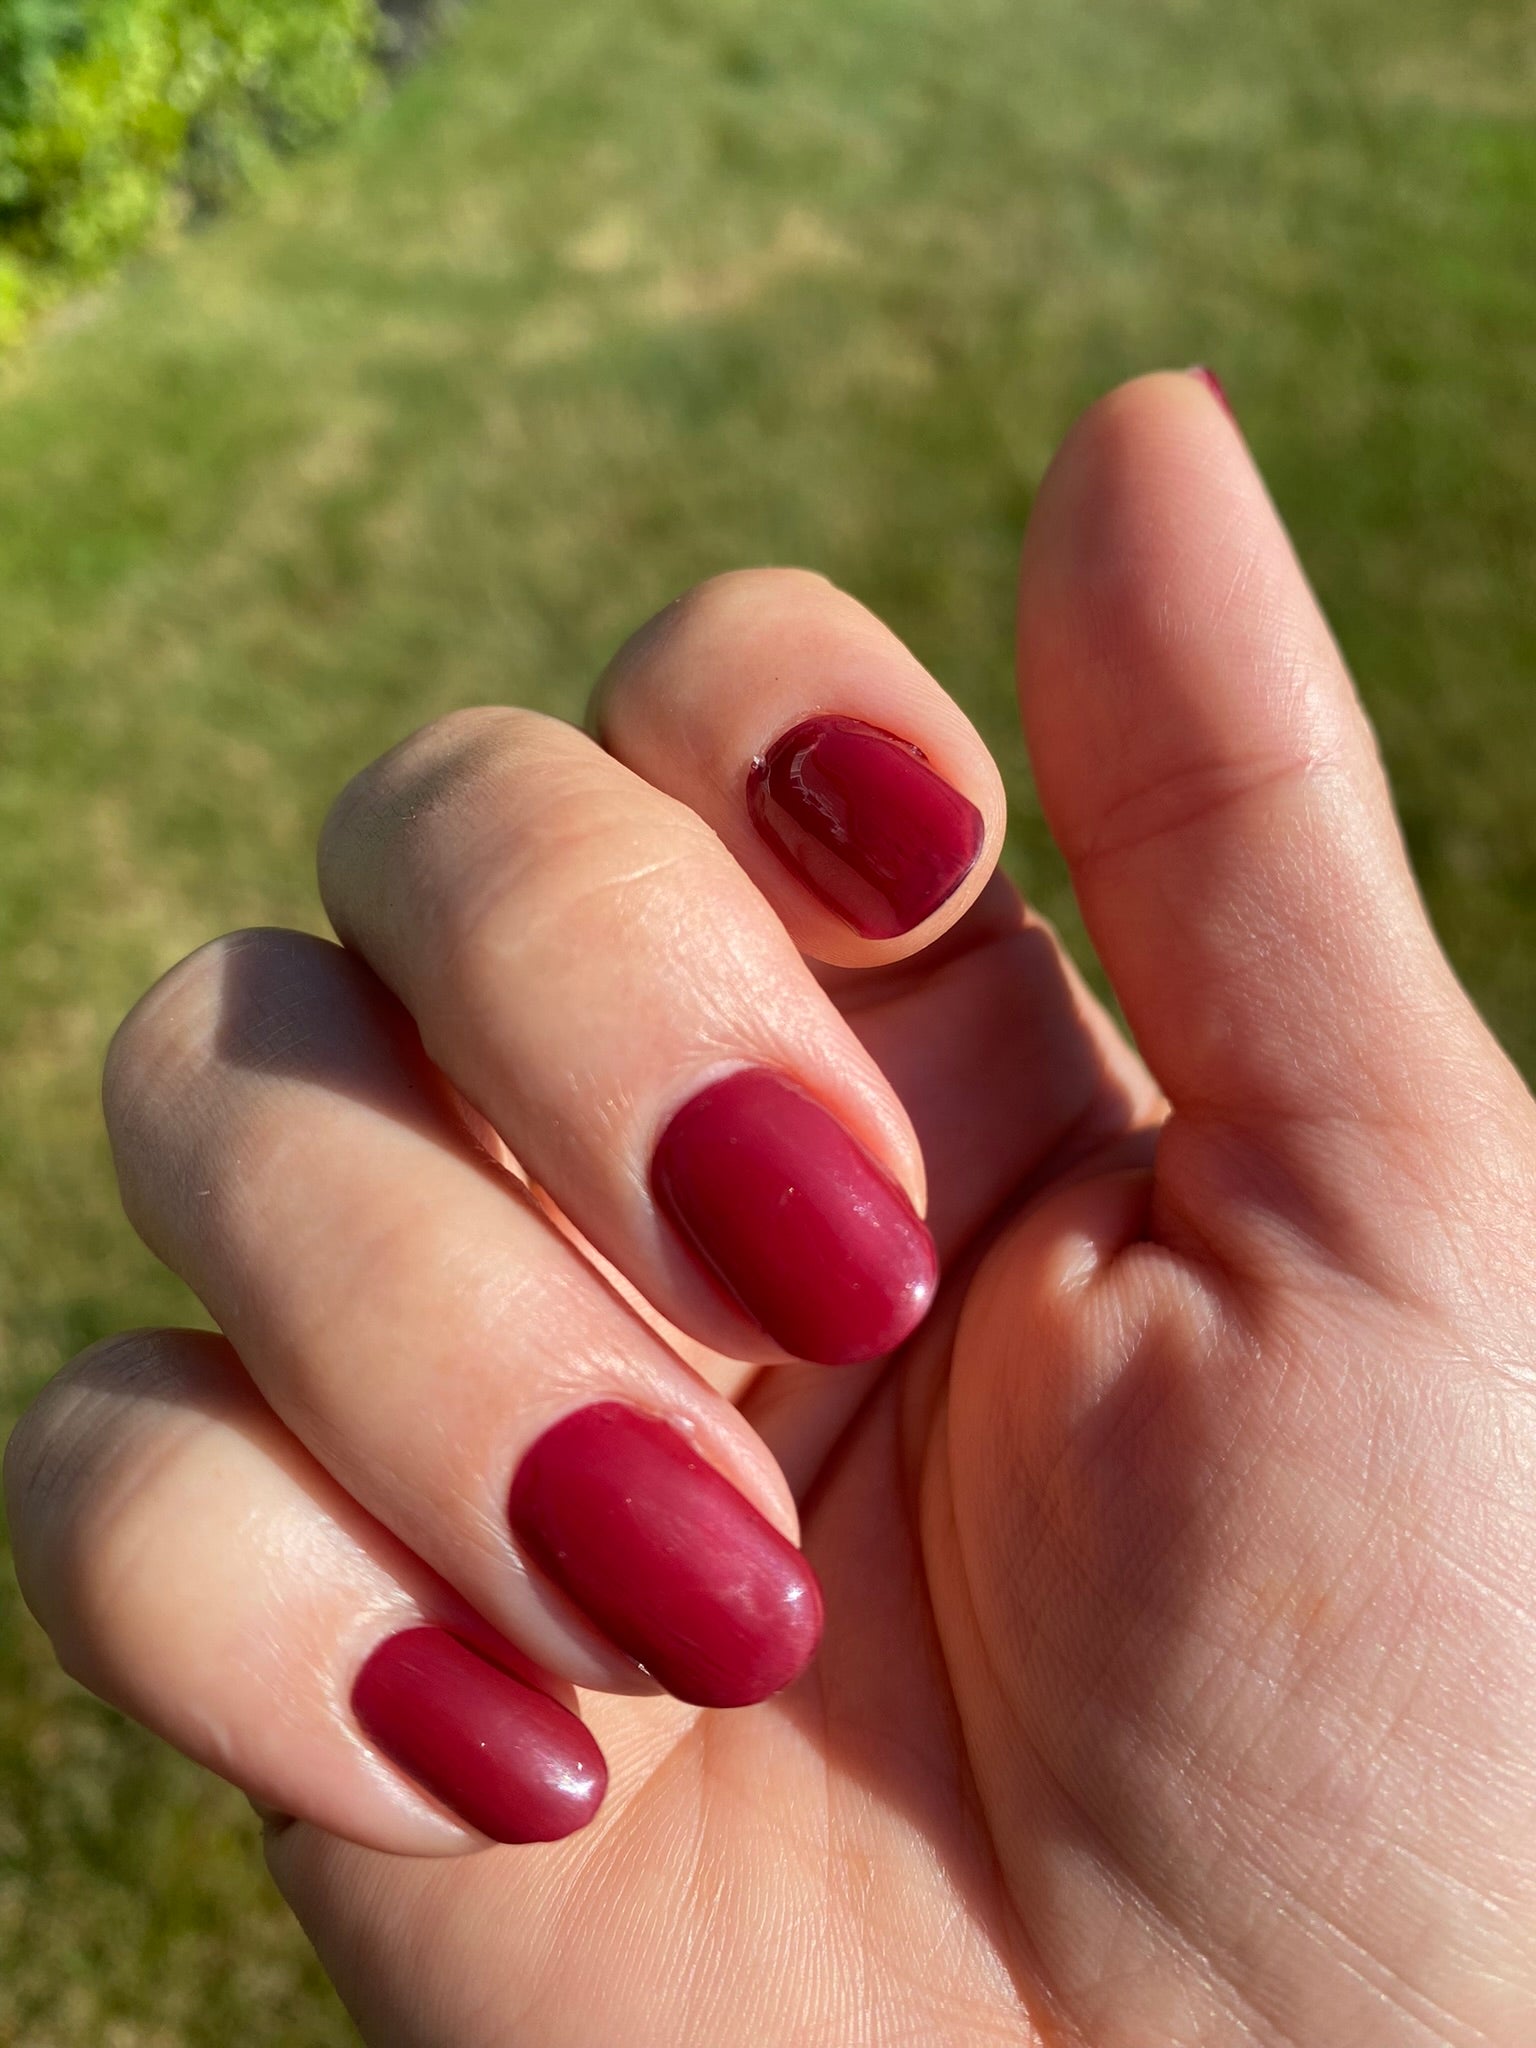 Transform your nail with Belle Nails Salon in Louisville, KY 40245